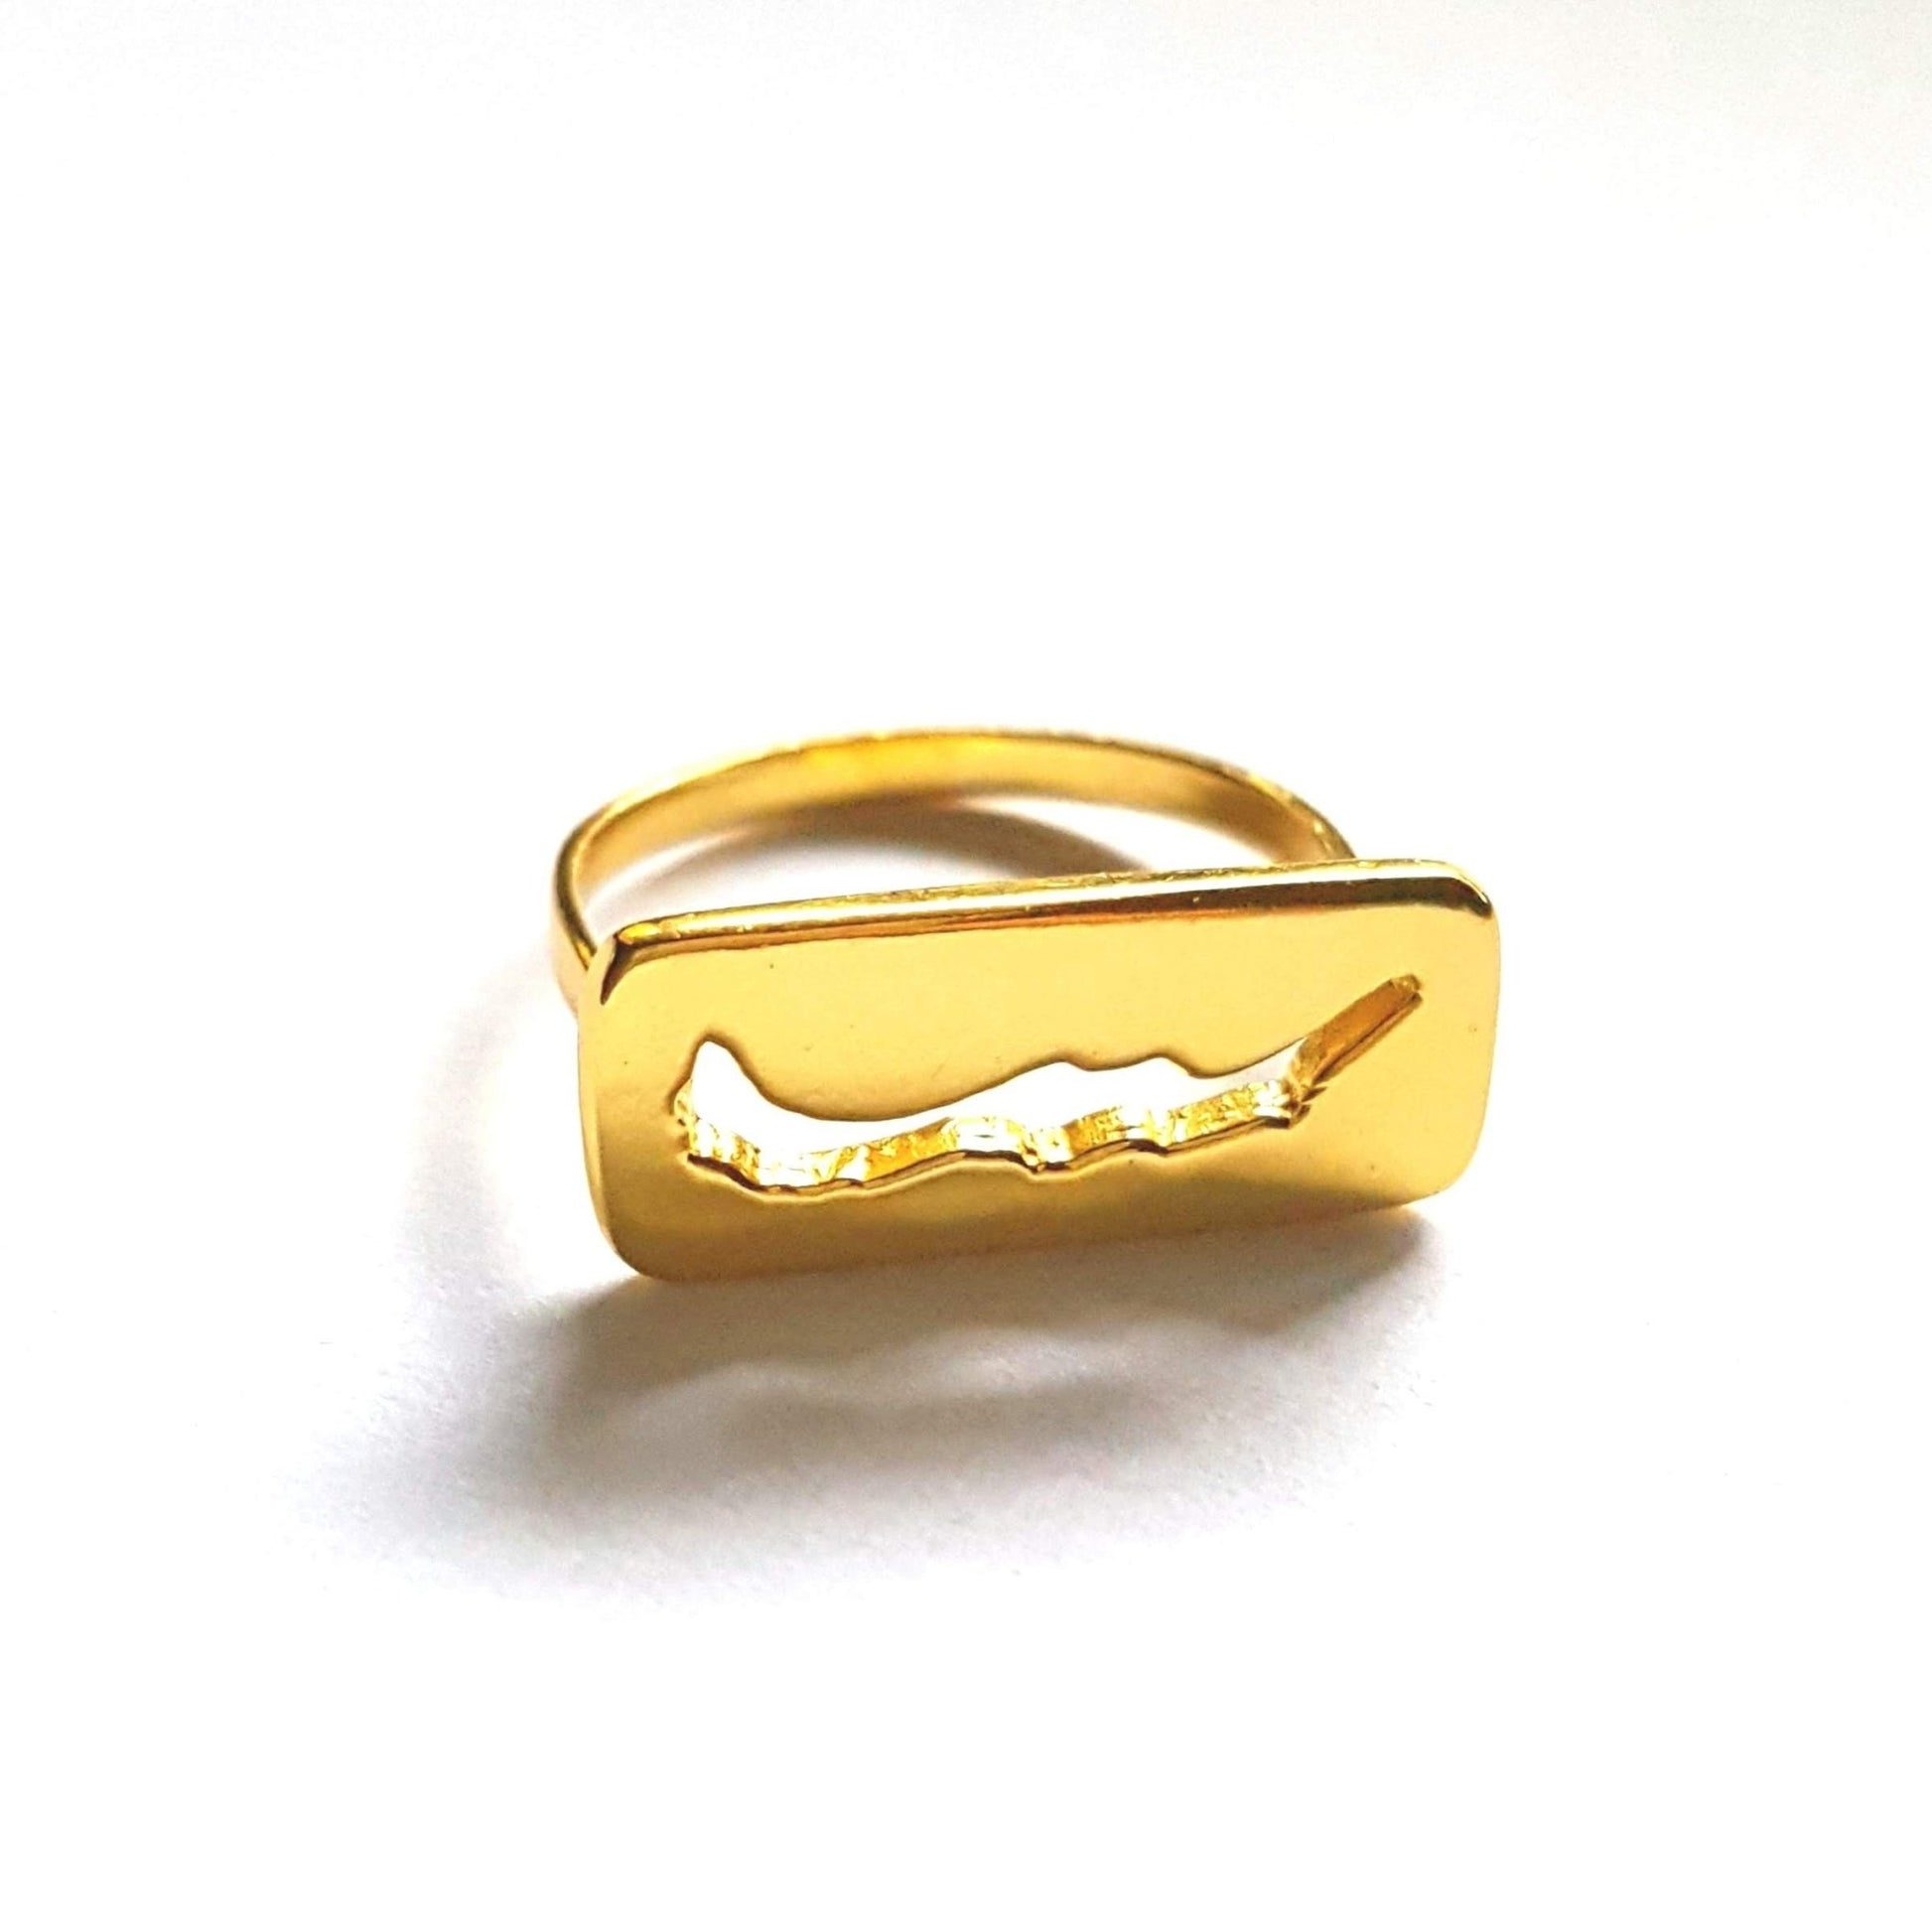 18k plated yellow gold - size 6 Savary island ring with savary island shape cut out of rectangle